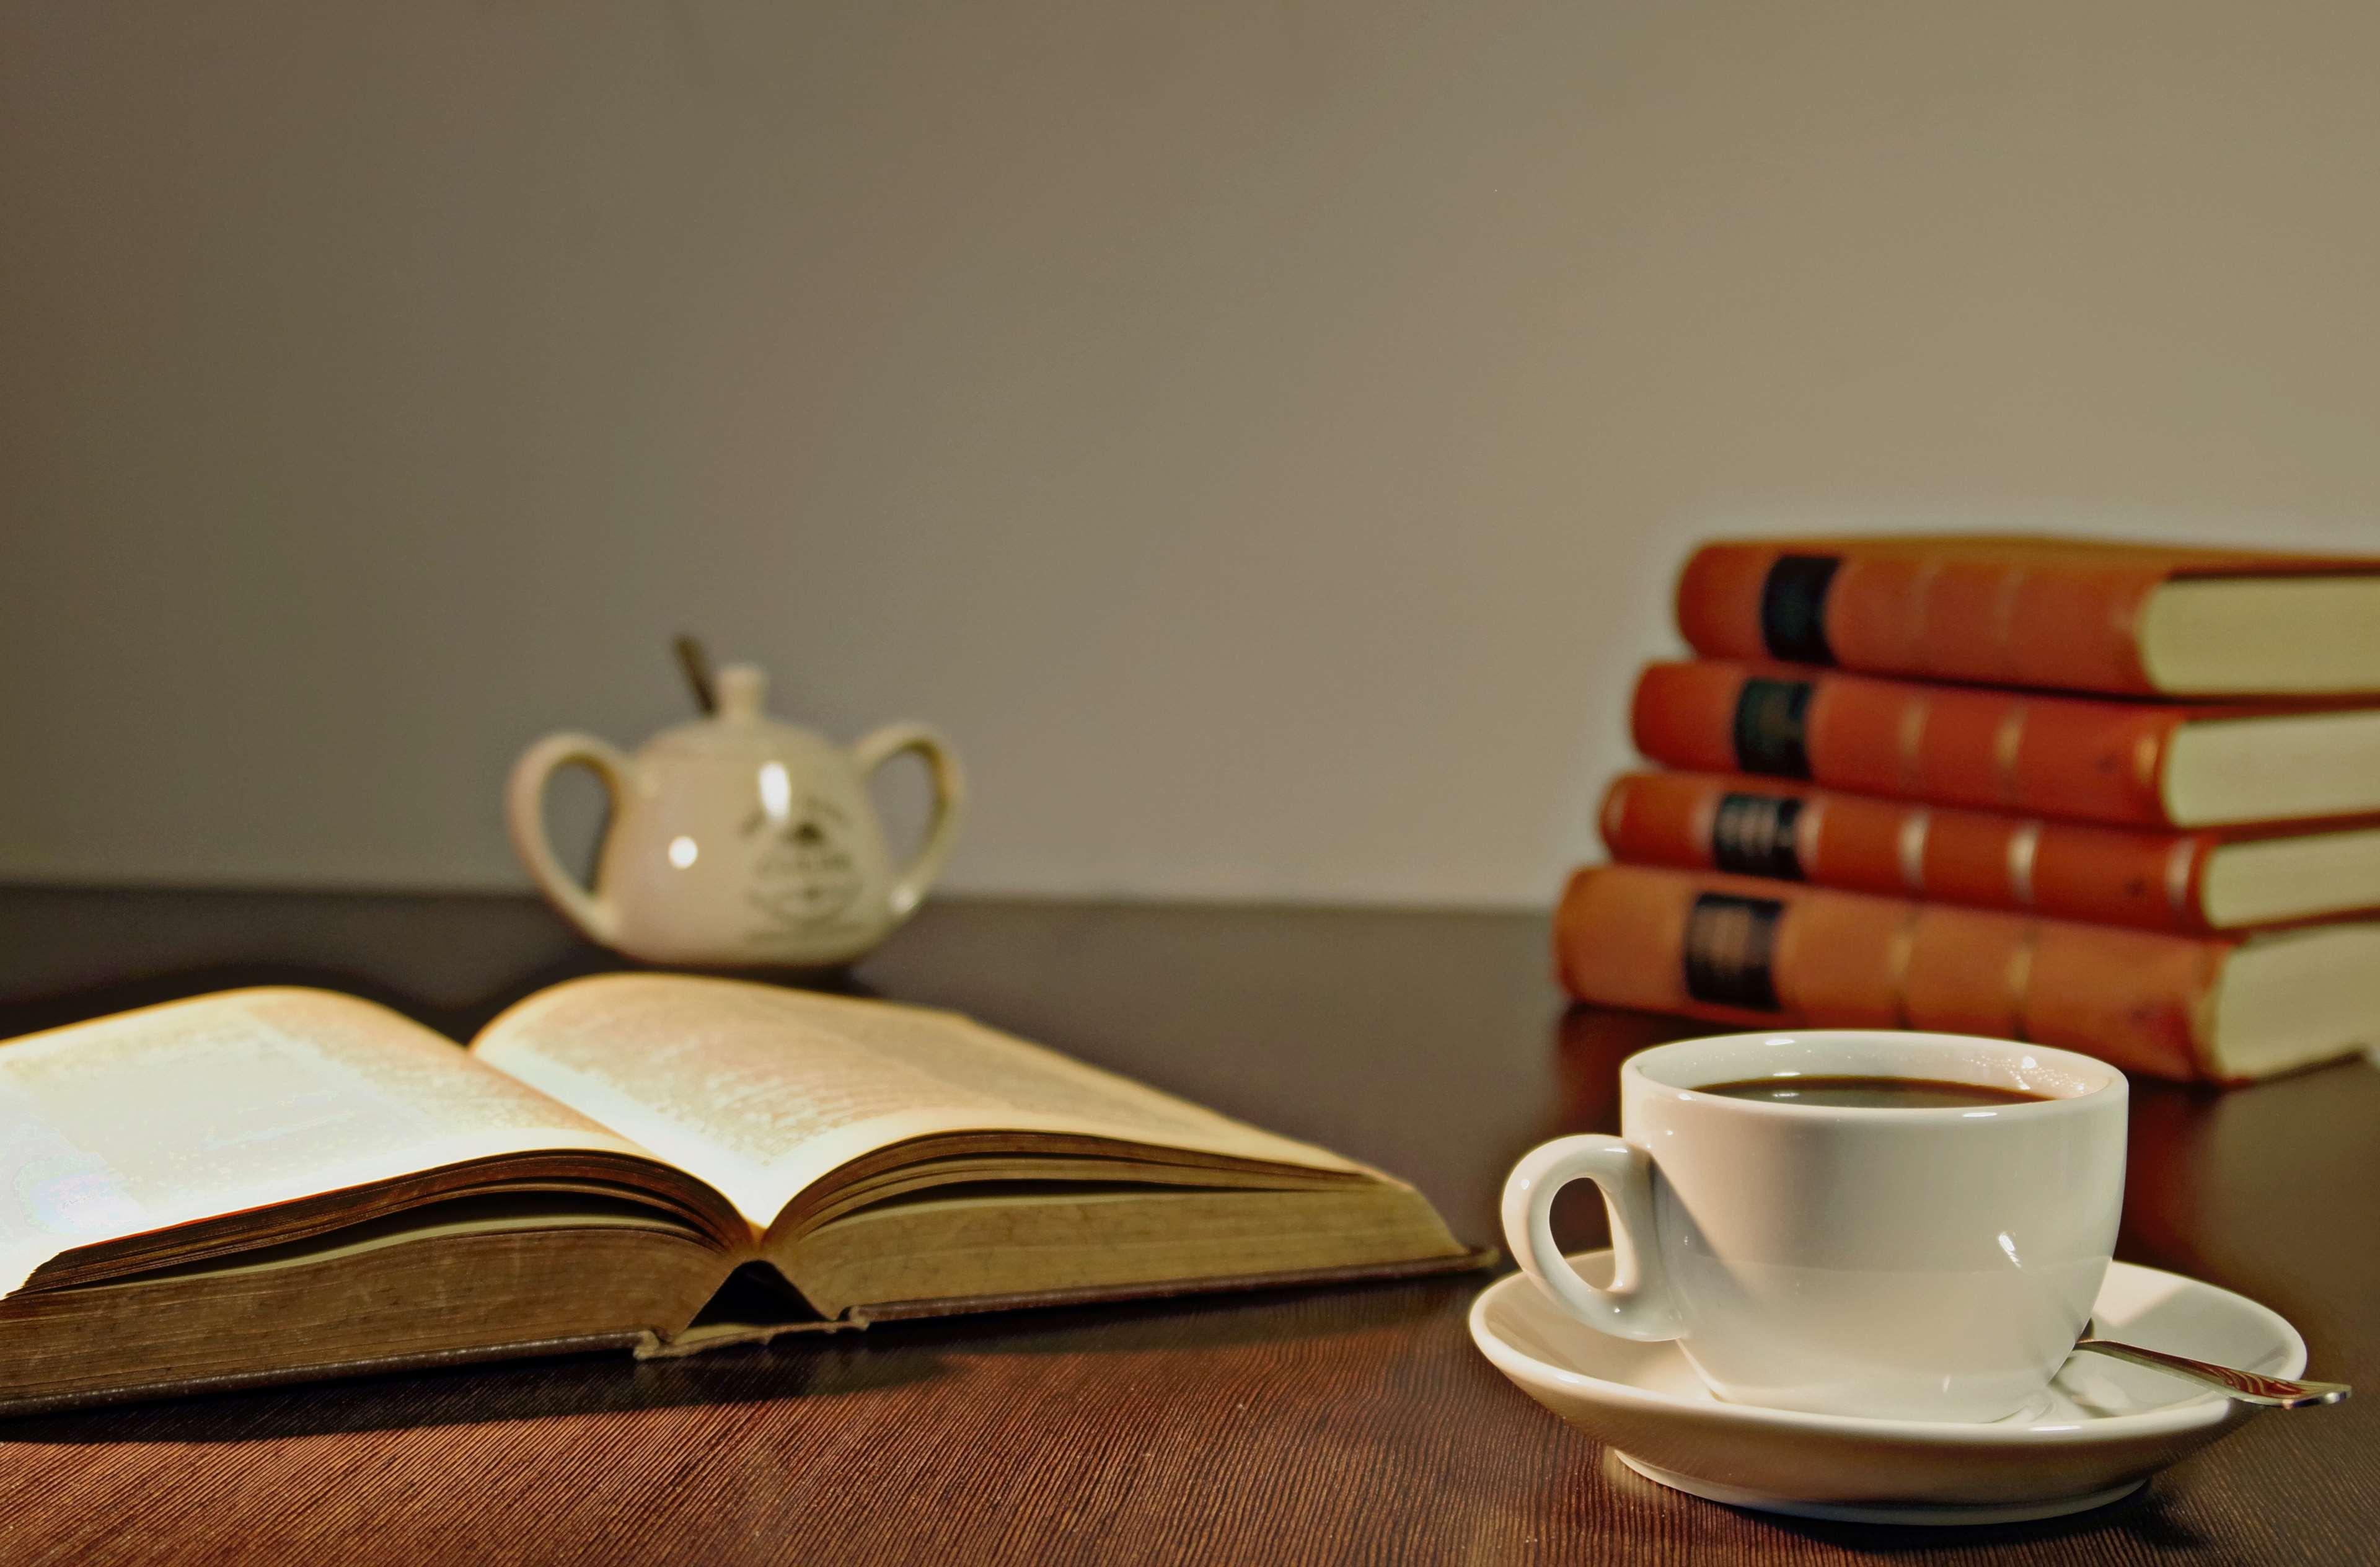 books, coffee, cup, education, knowledge, mug, pages, table